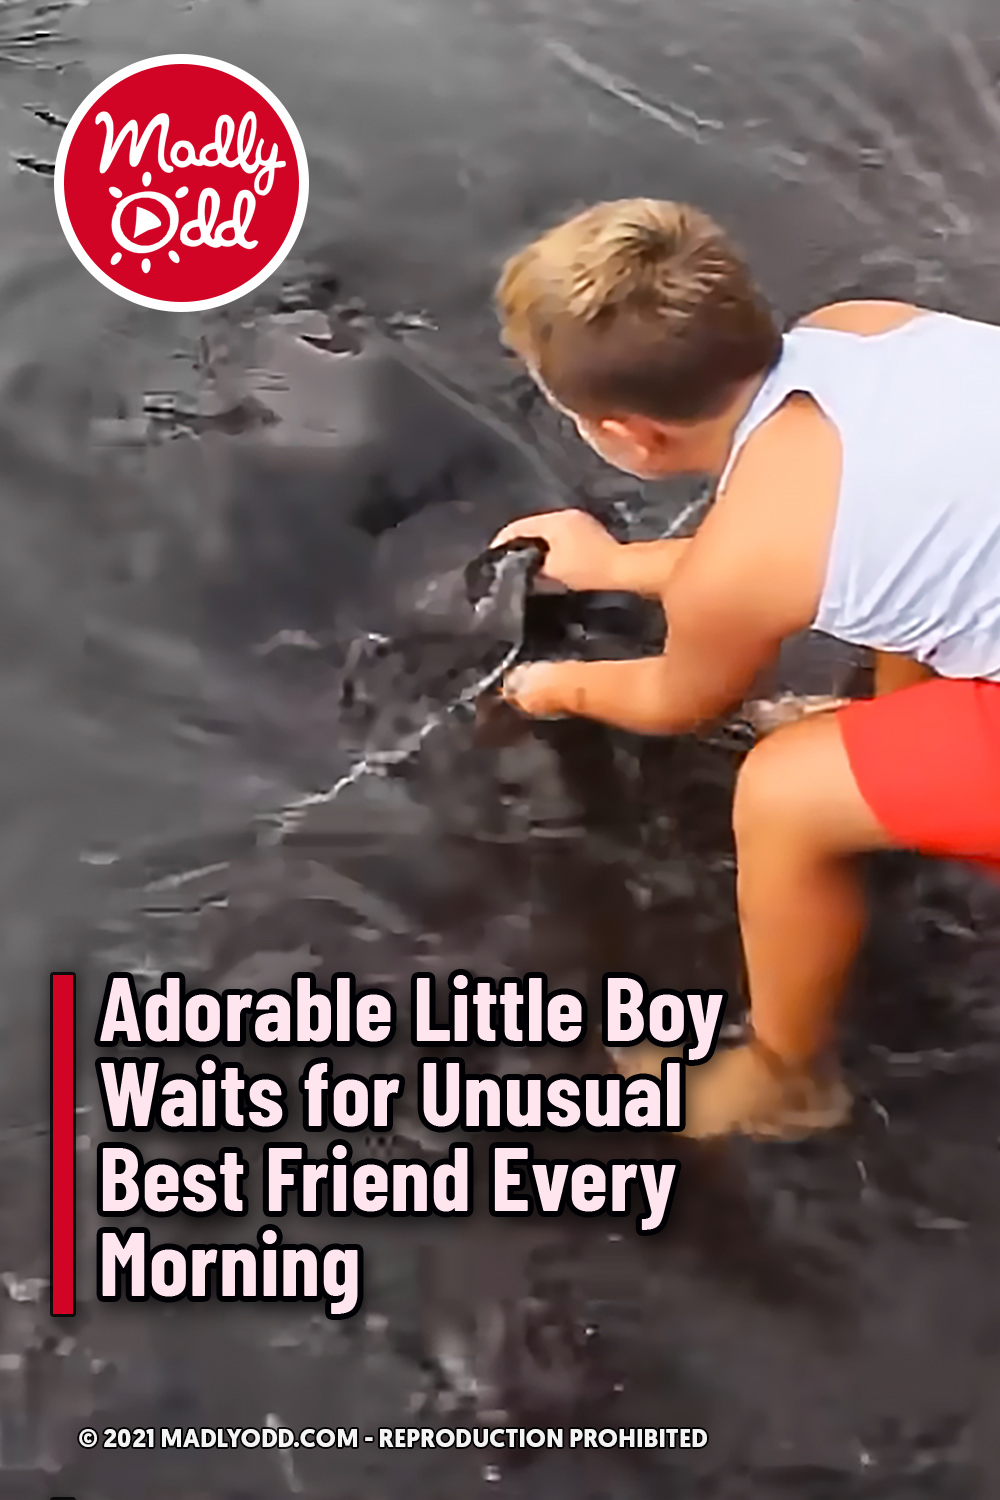 Adorable Little Boy Waits for Unusual Best Friend Every Morning